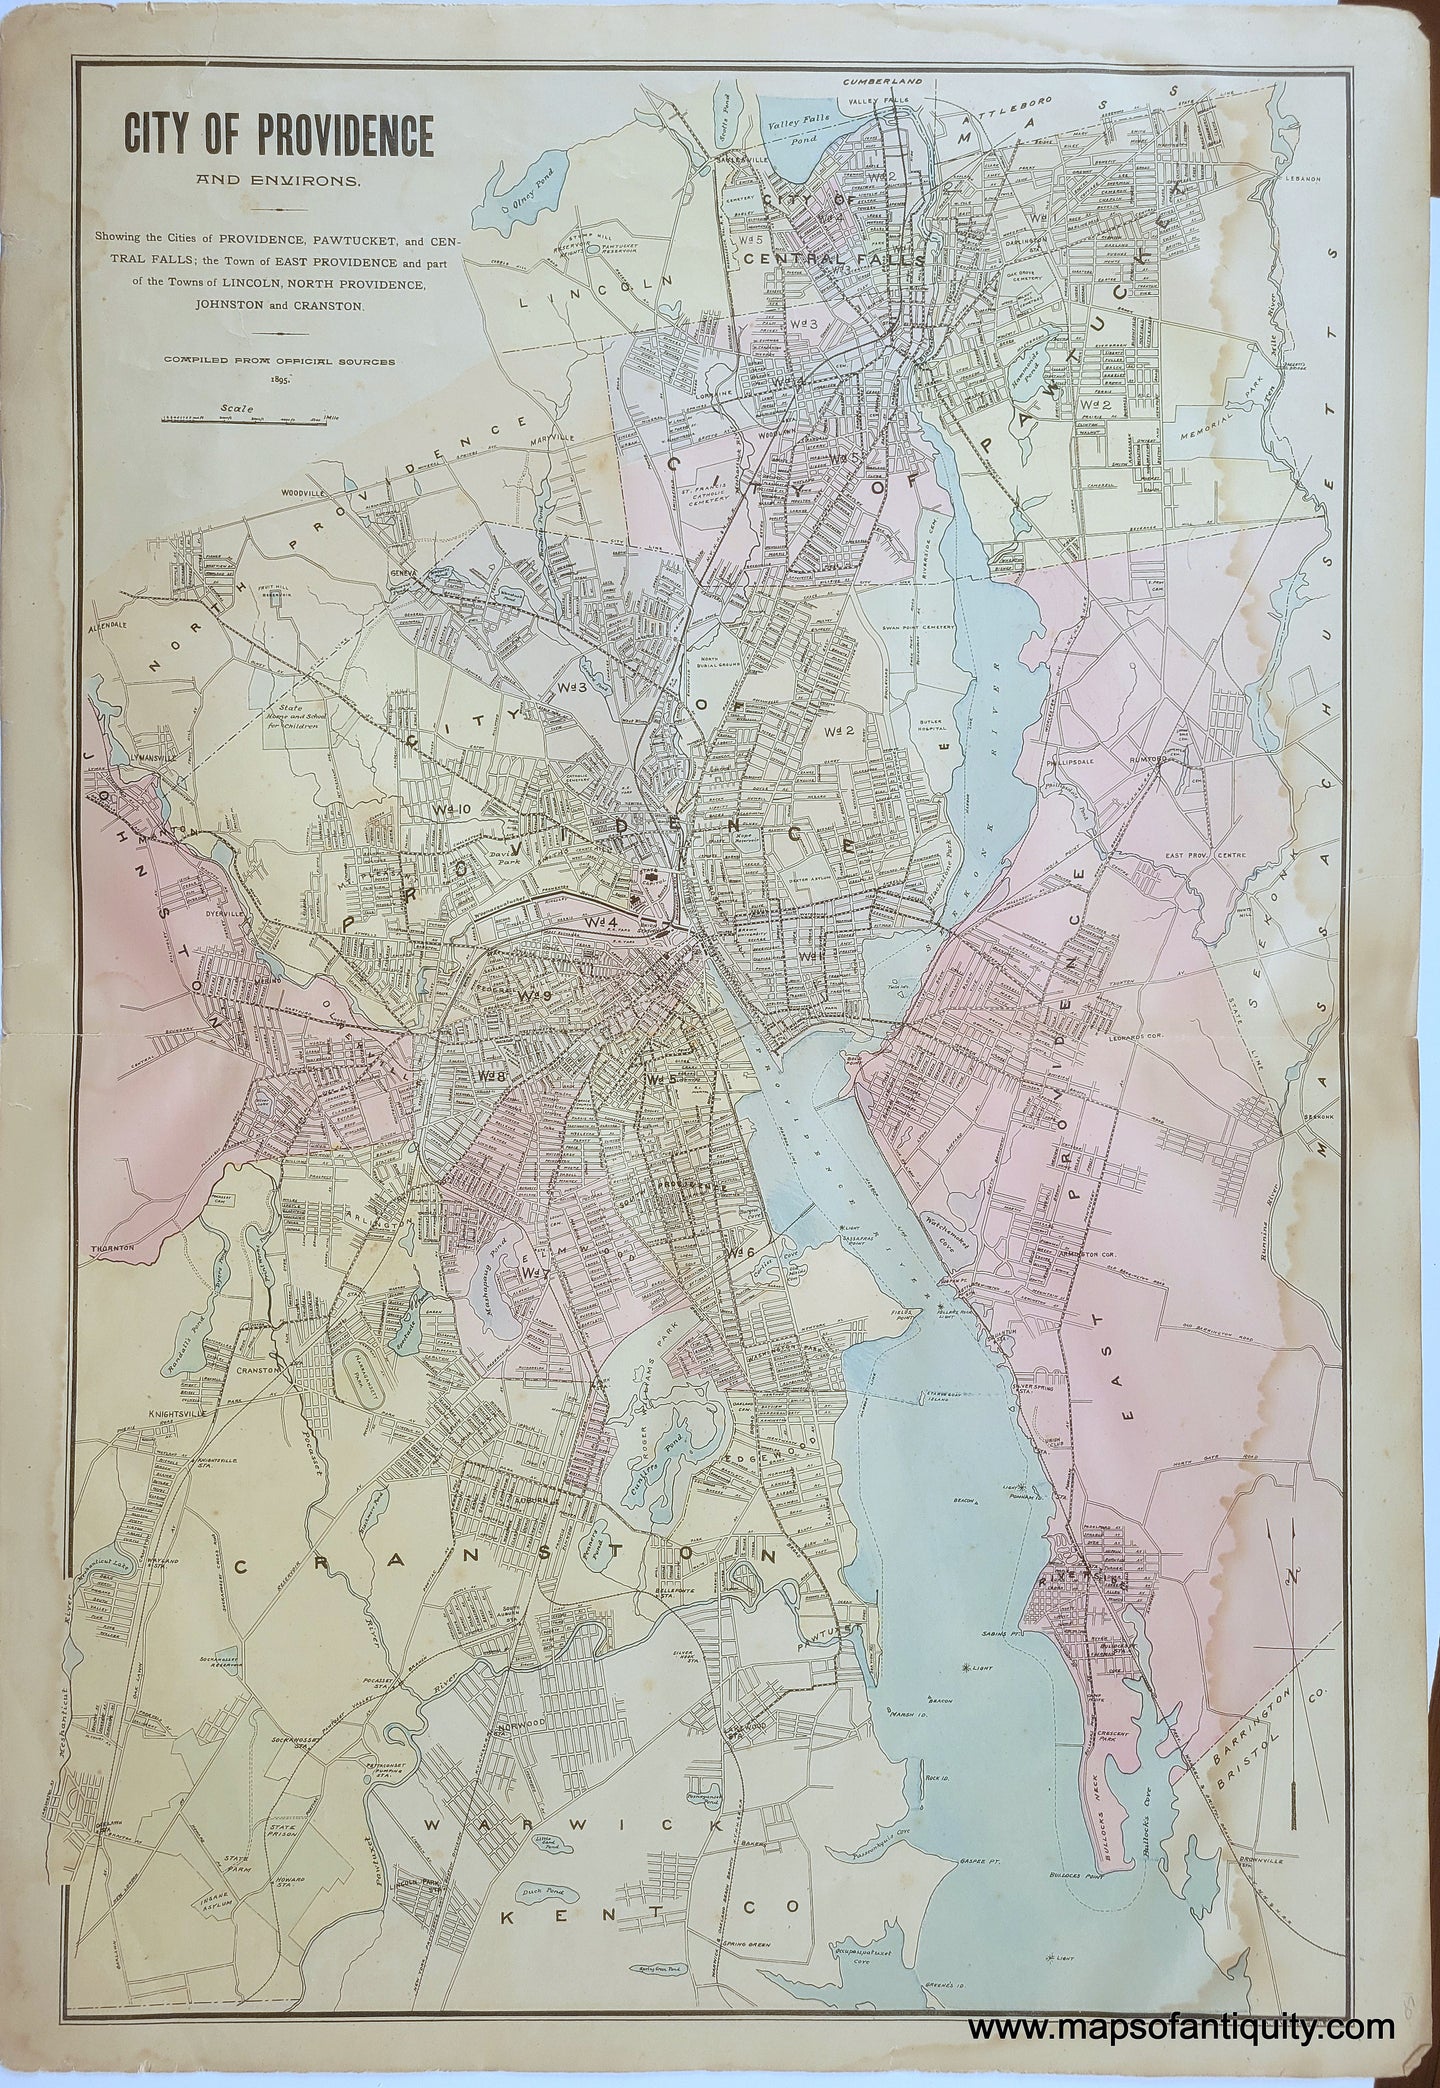 Antique-Hand-Colored-Map-City-of-Providence-United-States-Northeast-1895-Everts-&-Richards-Maps-Of-Antiquity